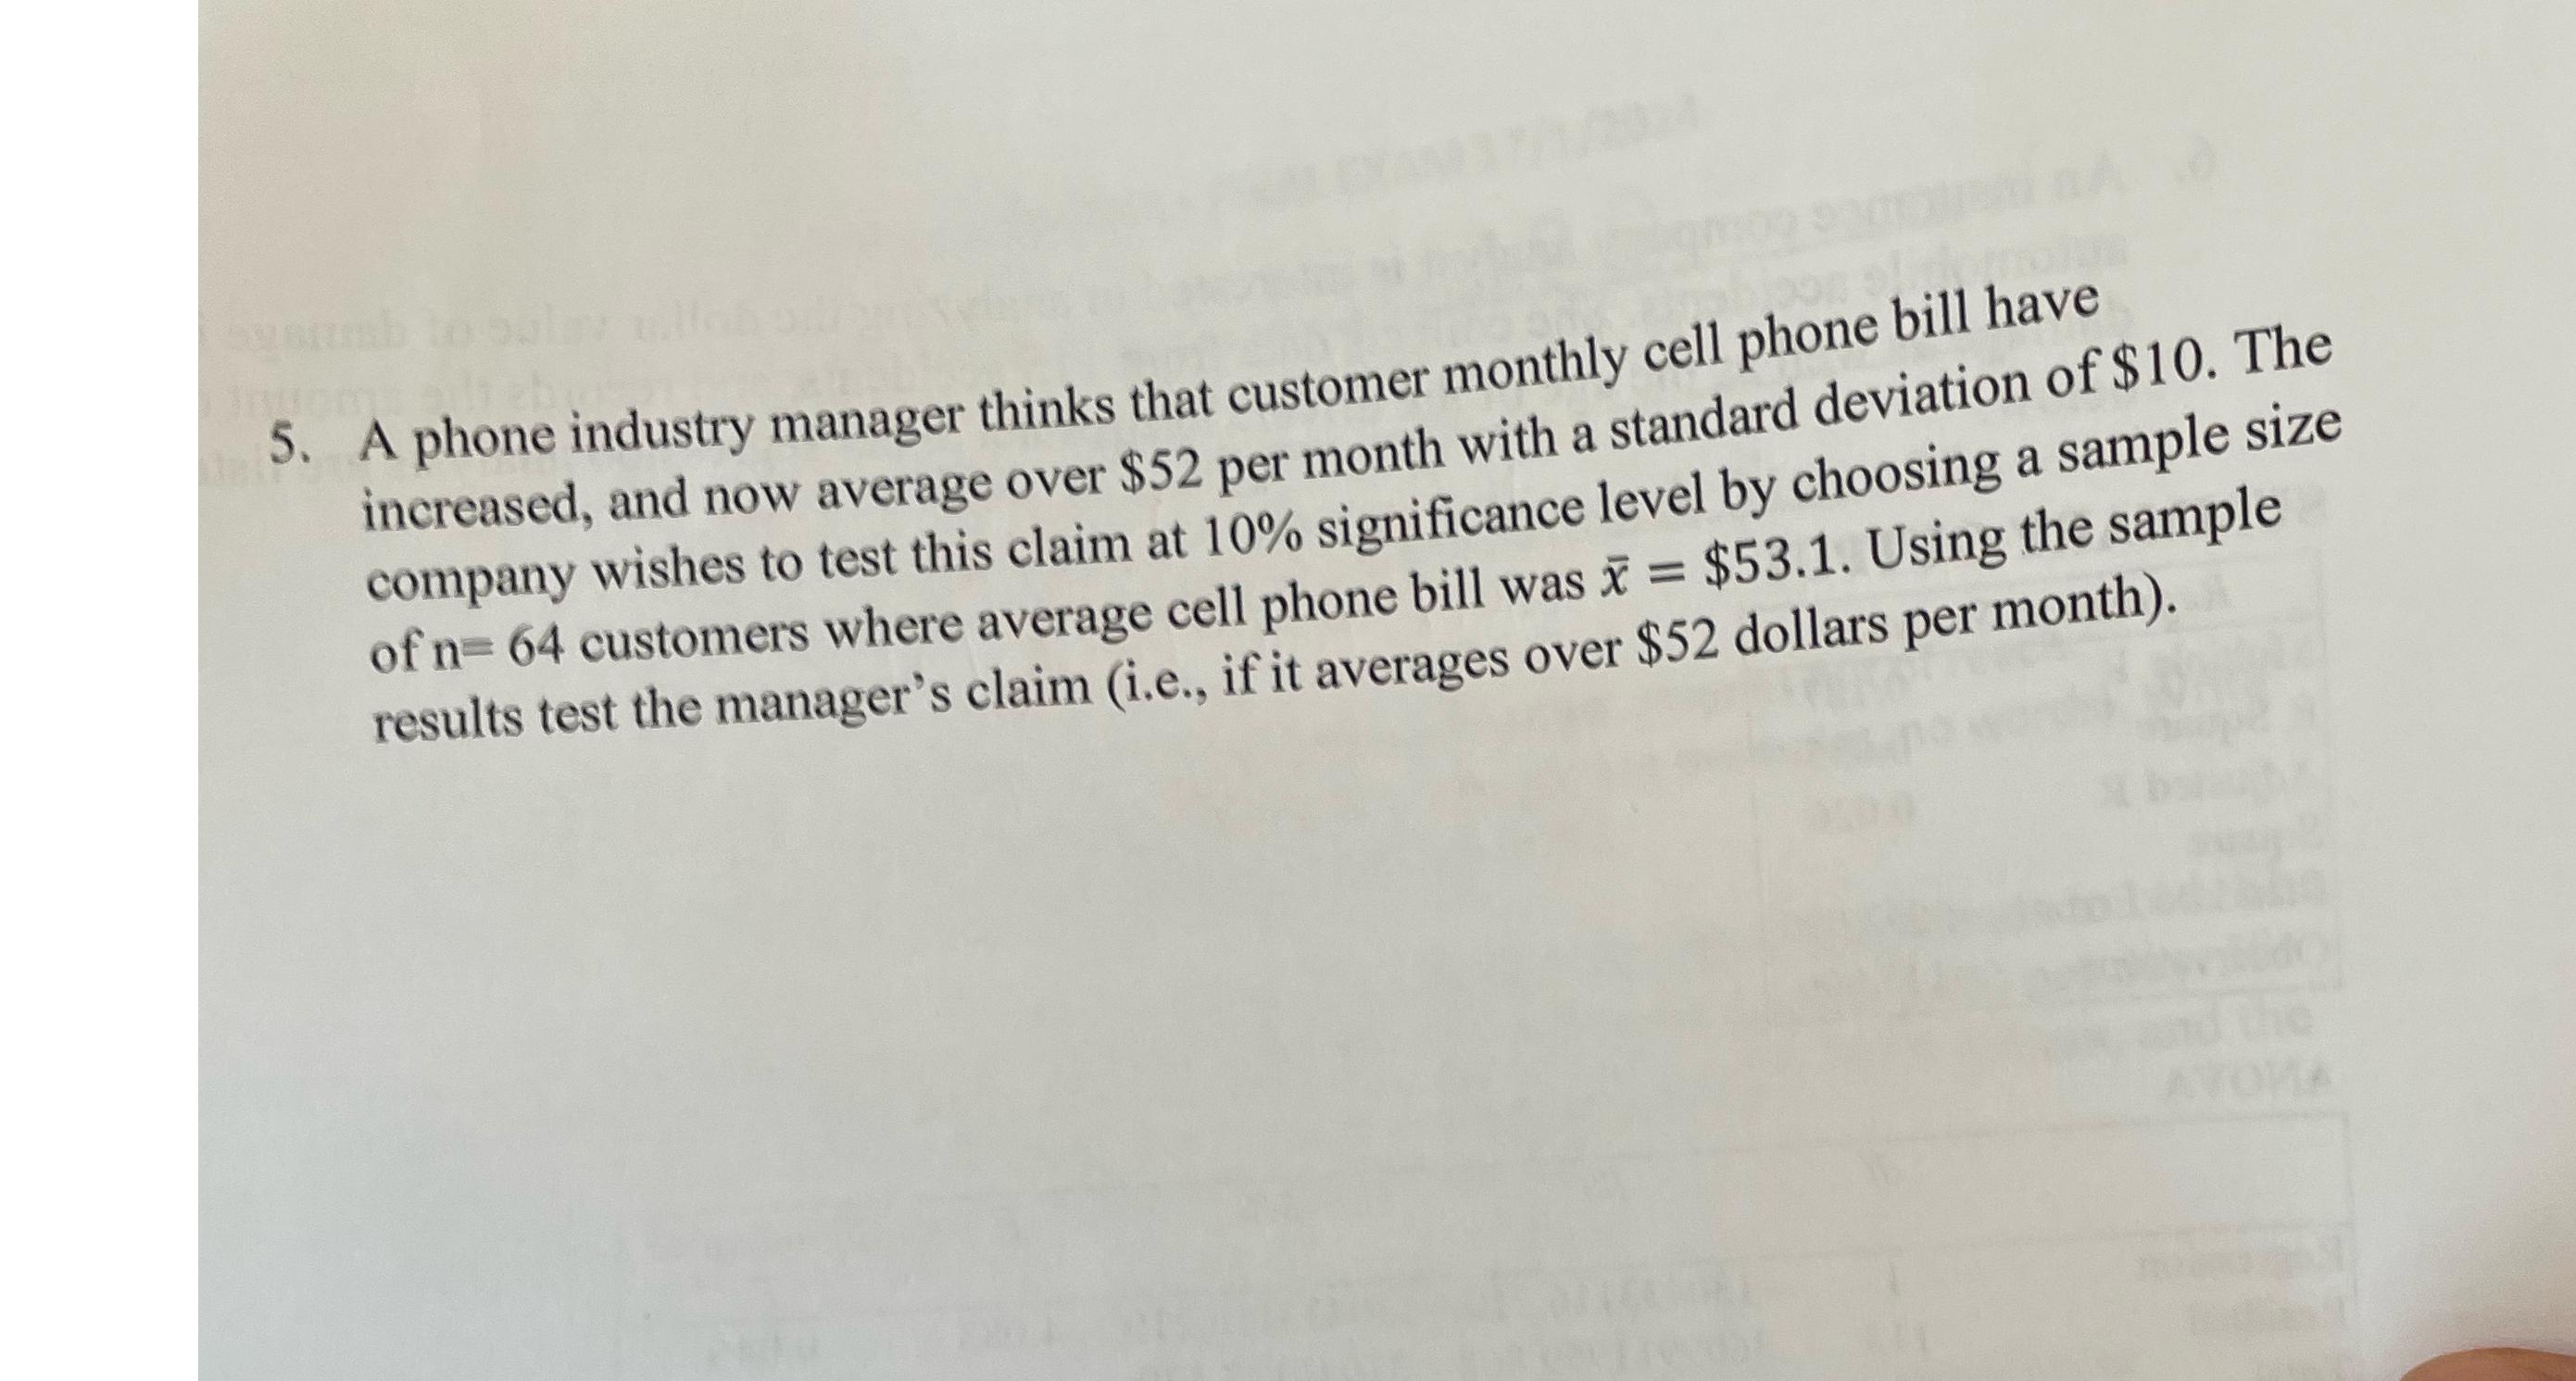 del 5. A phone industry manager thinks that customer monthly cell phone bill have increased, and now average